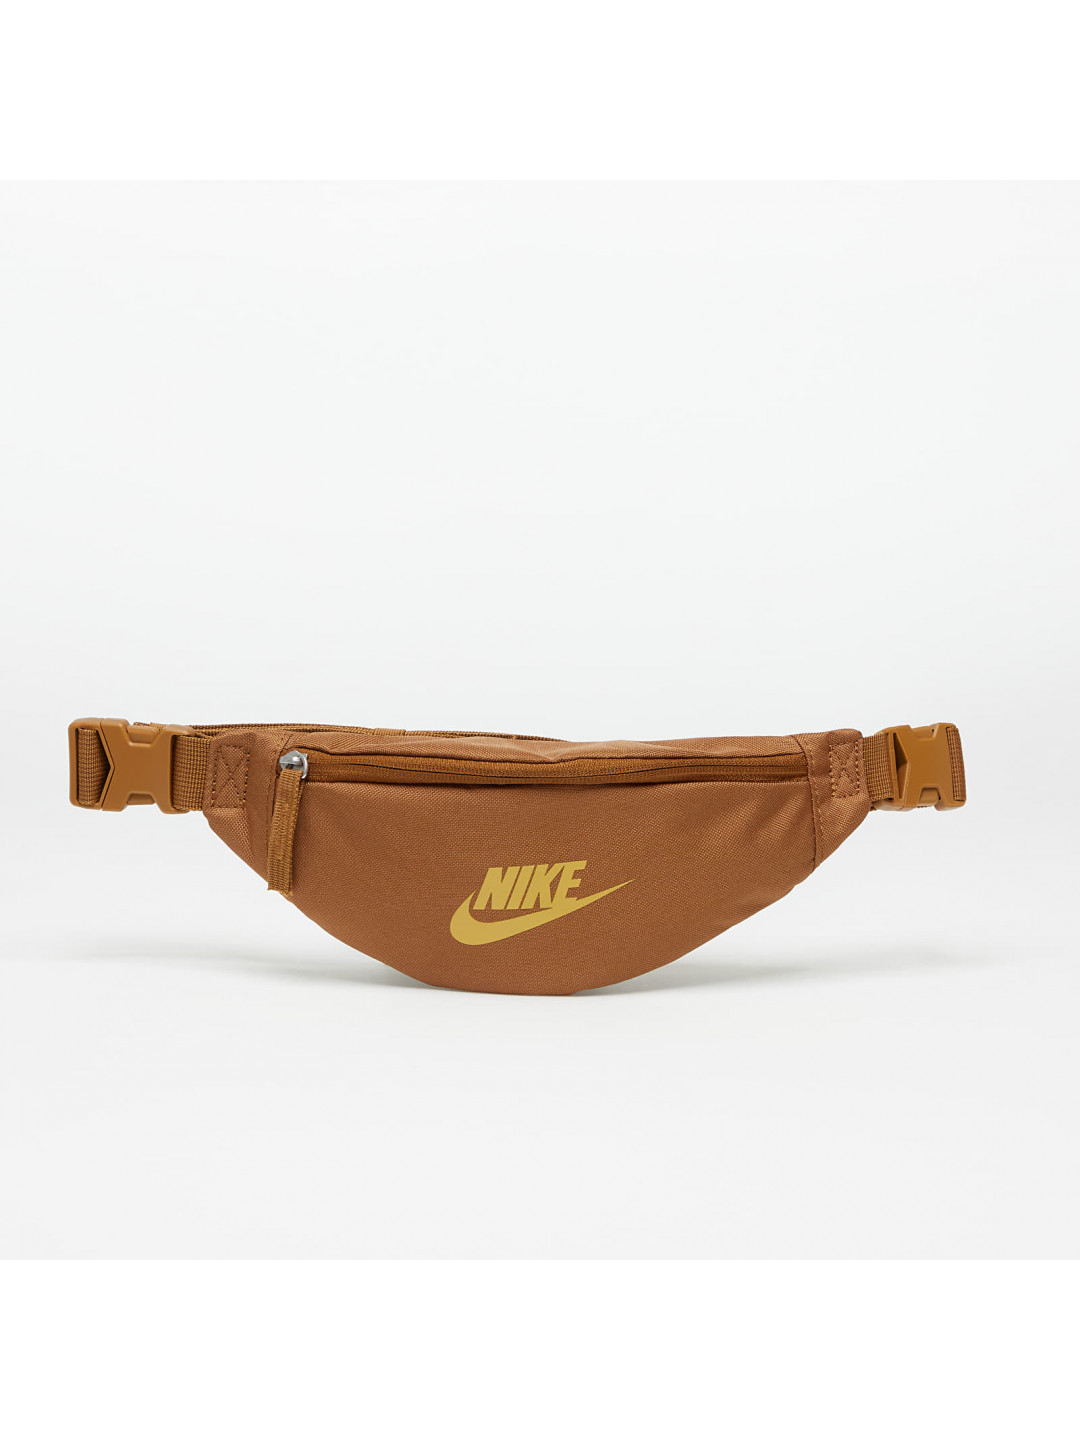 Nike Heritage Waistpack Ale Brown Ale Brown Wheat Gold